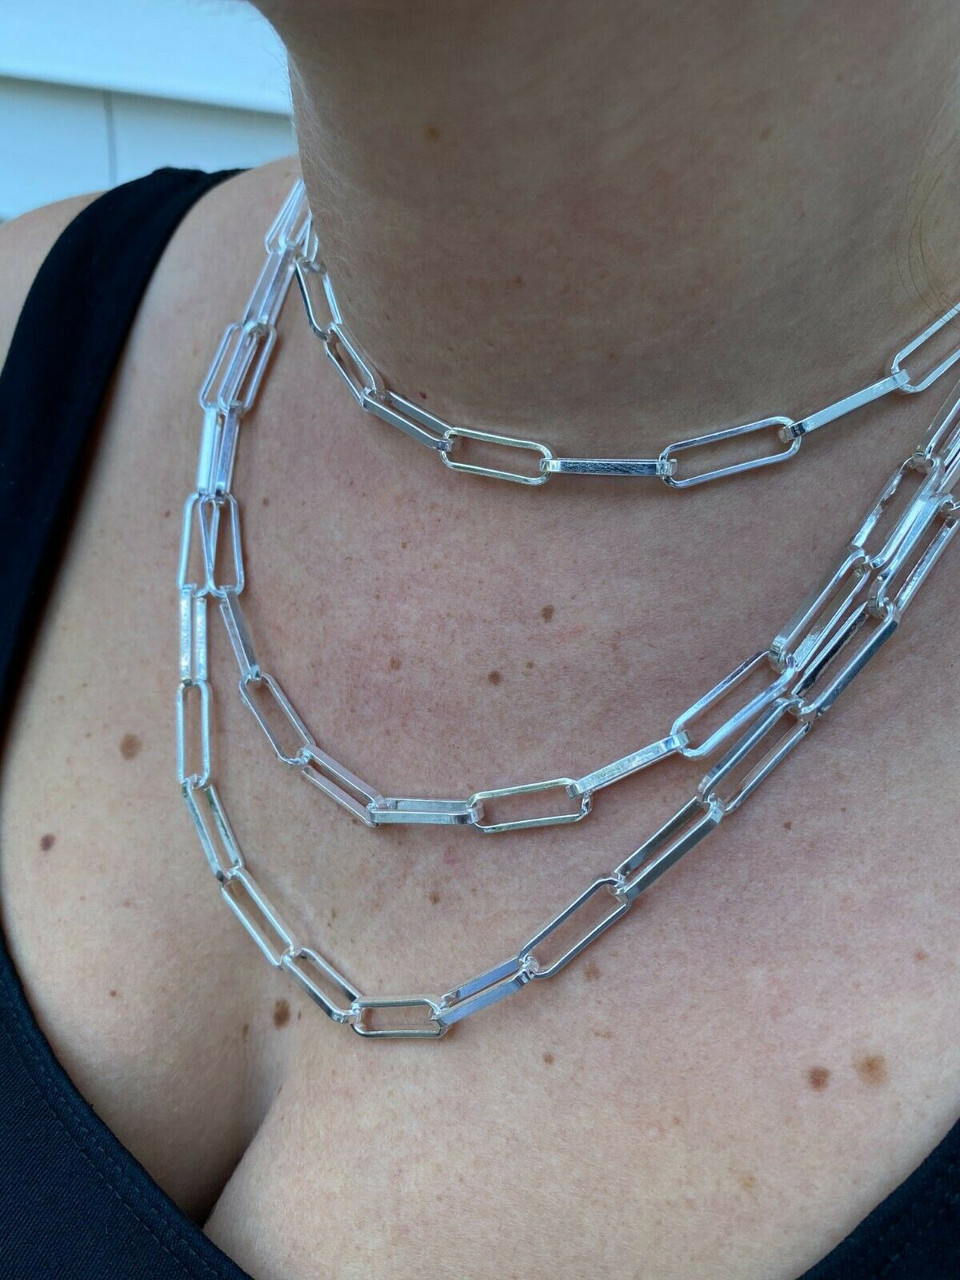 Large Paperclip Chain Necklace - Sterling Silver